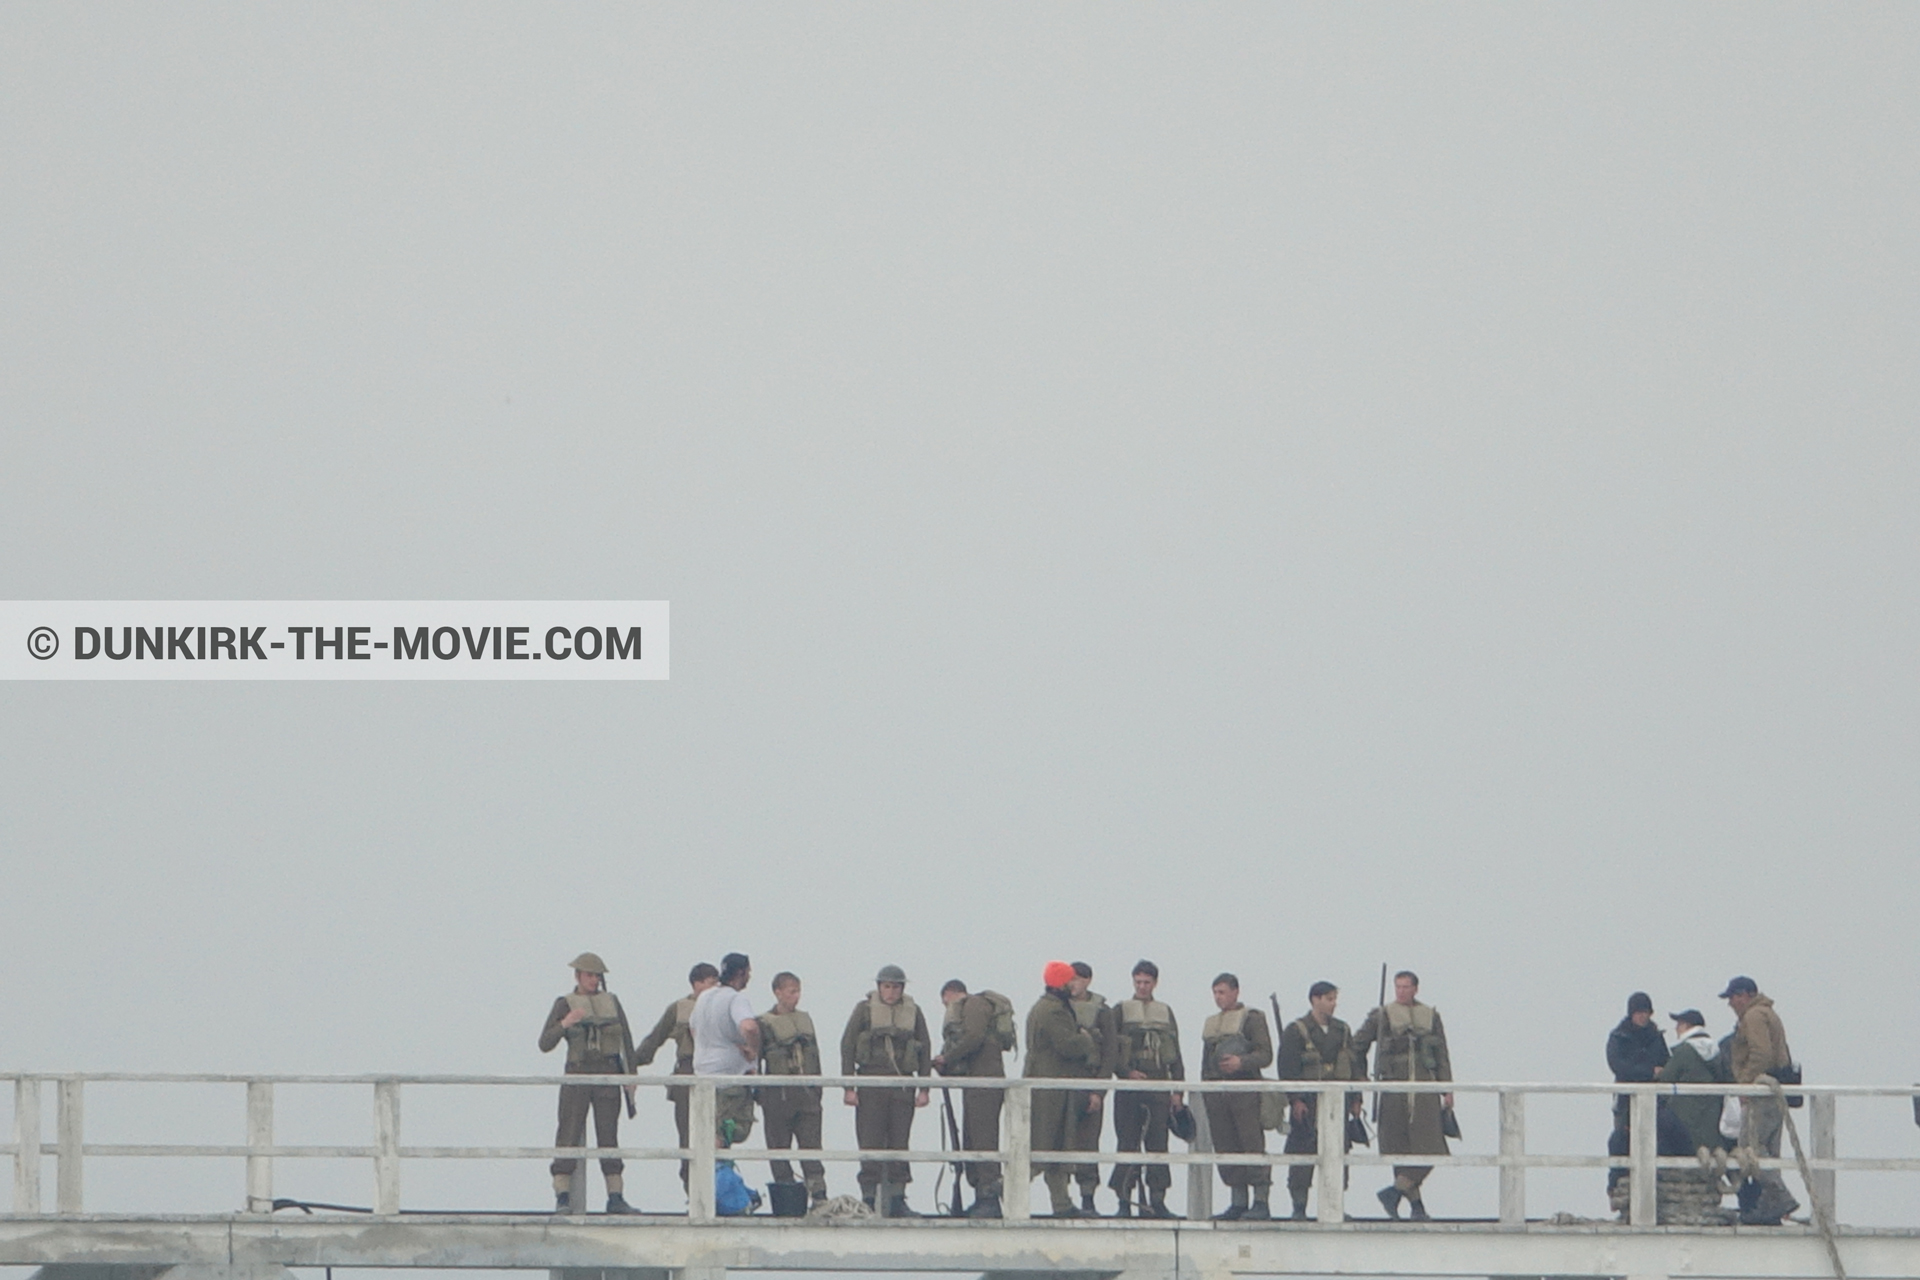 Picture with actor, grey sky, supernumeraries, EST pier, technical team,  from behind the scene of the Dunkirk movie by Nolan